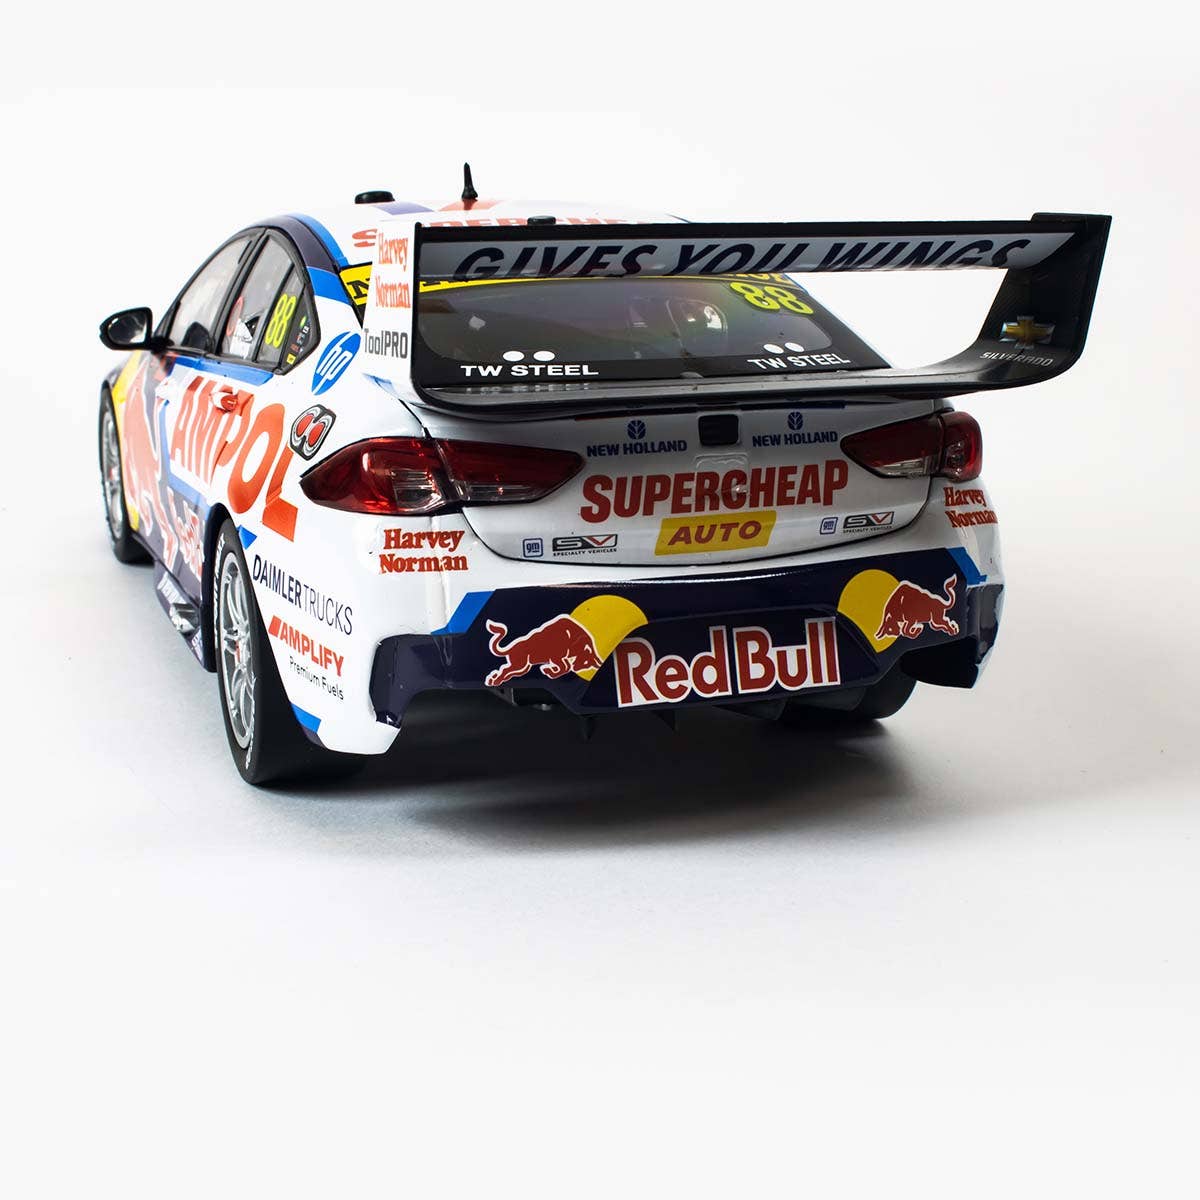 HOLDEN ZB COMMODORE - RED BULL AMPOL RACING - FEENEY/WHINCUP #88 - 2022 Bathurst 1000 - 1:43 Scale Diecast Model Car